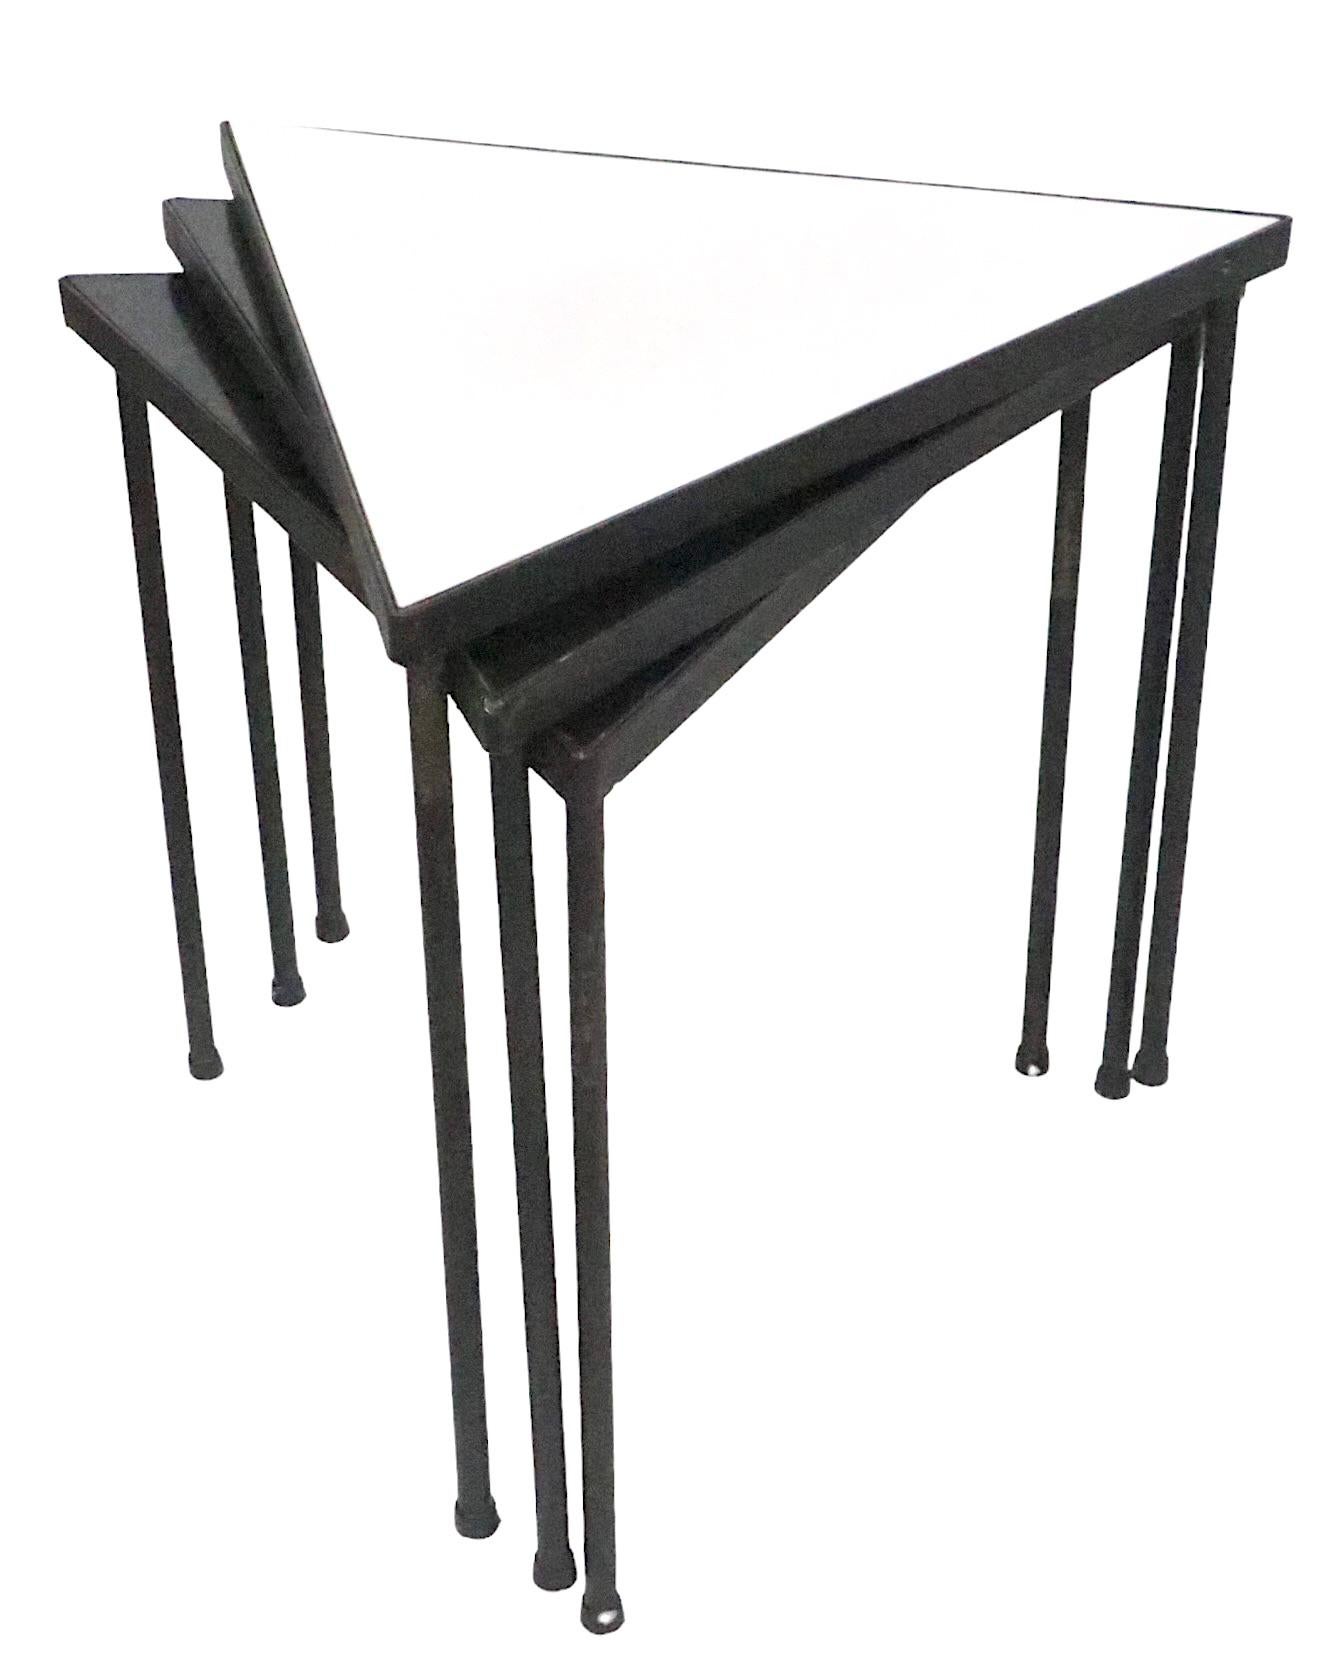 Set of three mid century triangular stacking tables, designed by Frederic Weinberg circa 1950's. The set consists of two black top  and one white top tables, which can be used individually as side, end or serving tables, or placed together to create